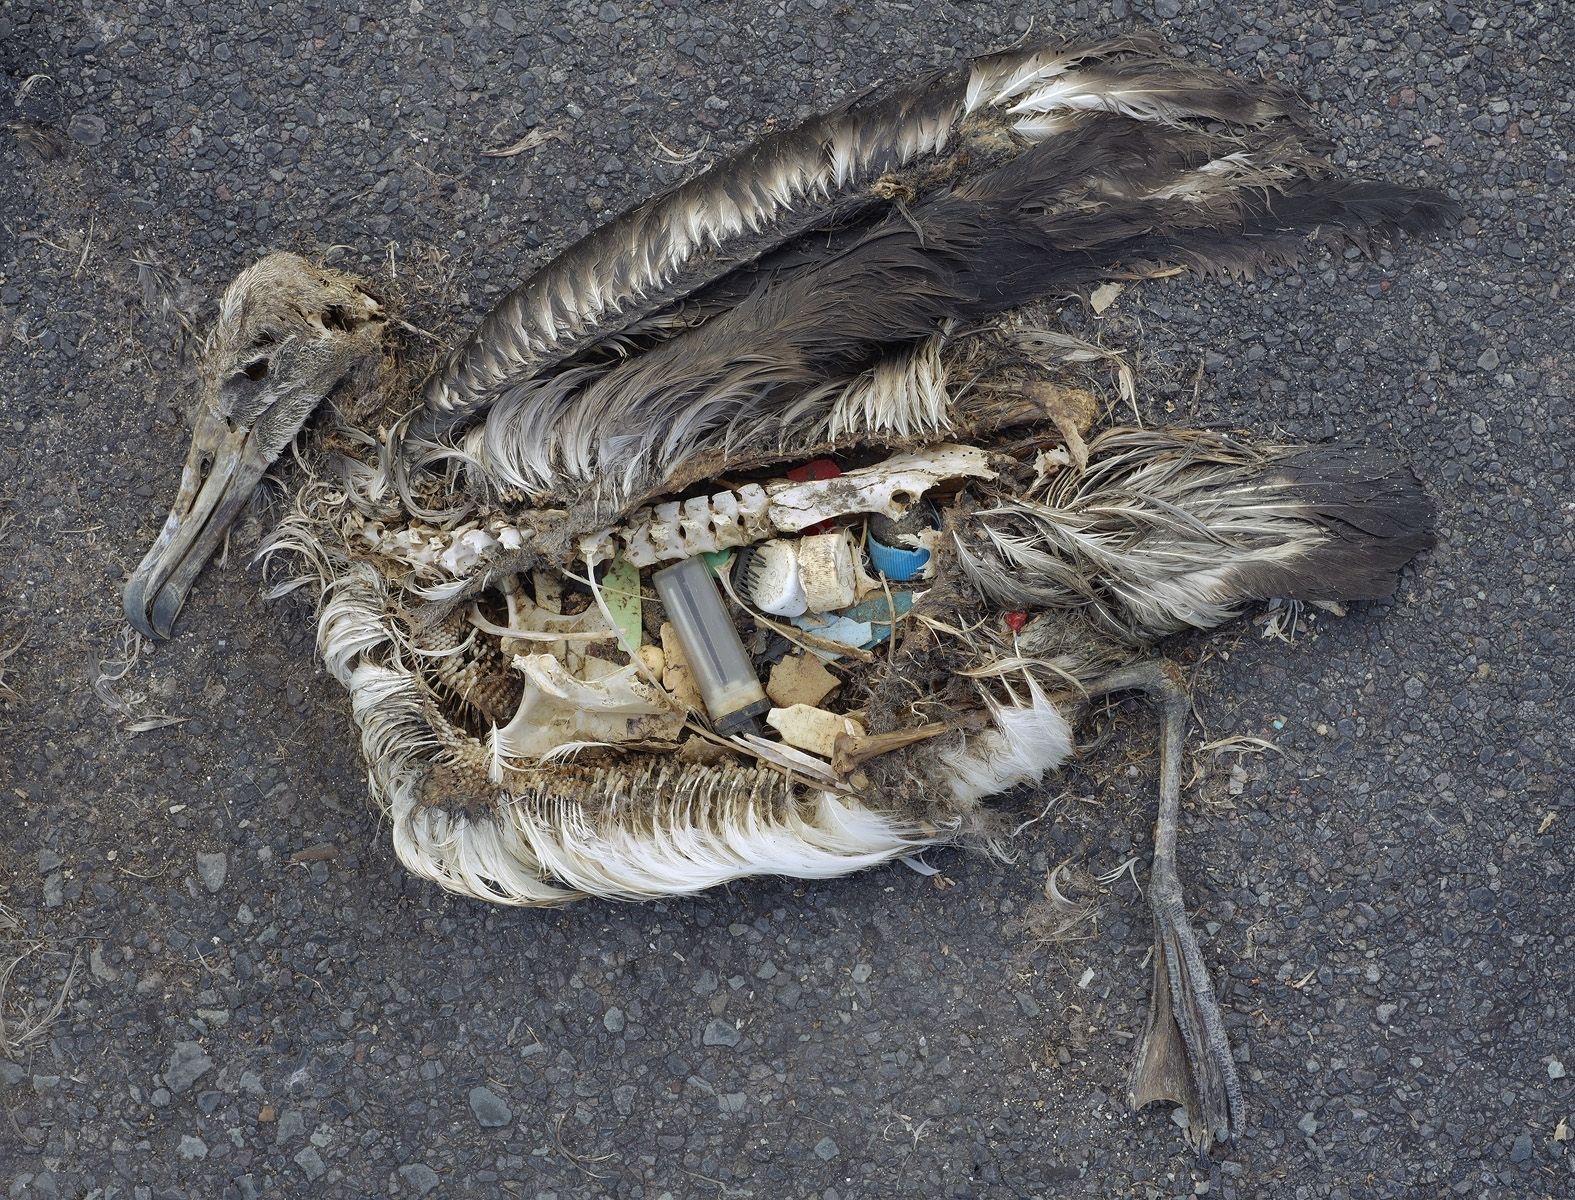 Remains of a starved albatross chick at Midway Atoll Refuge, showing its unaltered (plastic) stomach contents fed to the chick by its parents (2009 photo by Chris Jordan, U.S. Fish and Wildlife Service)